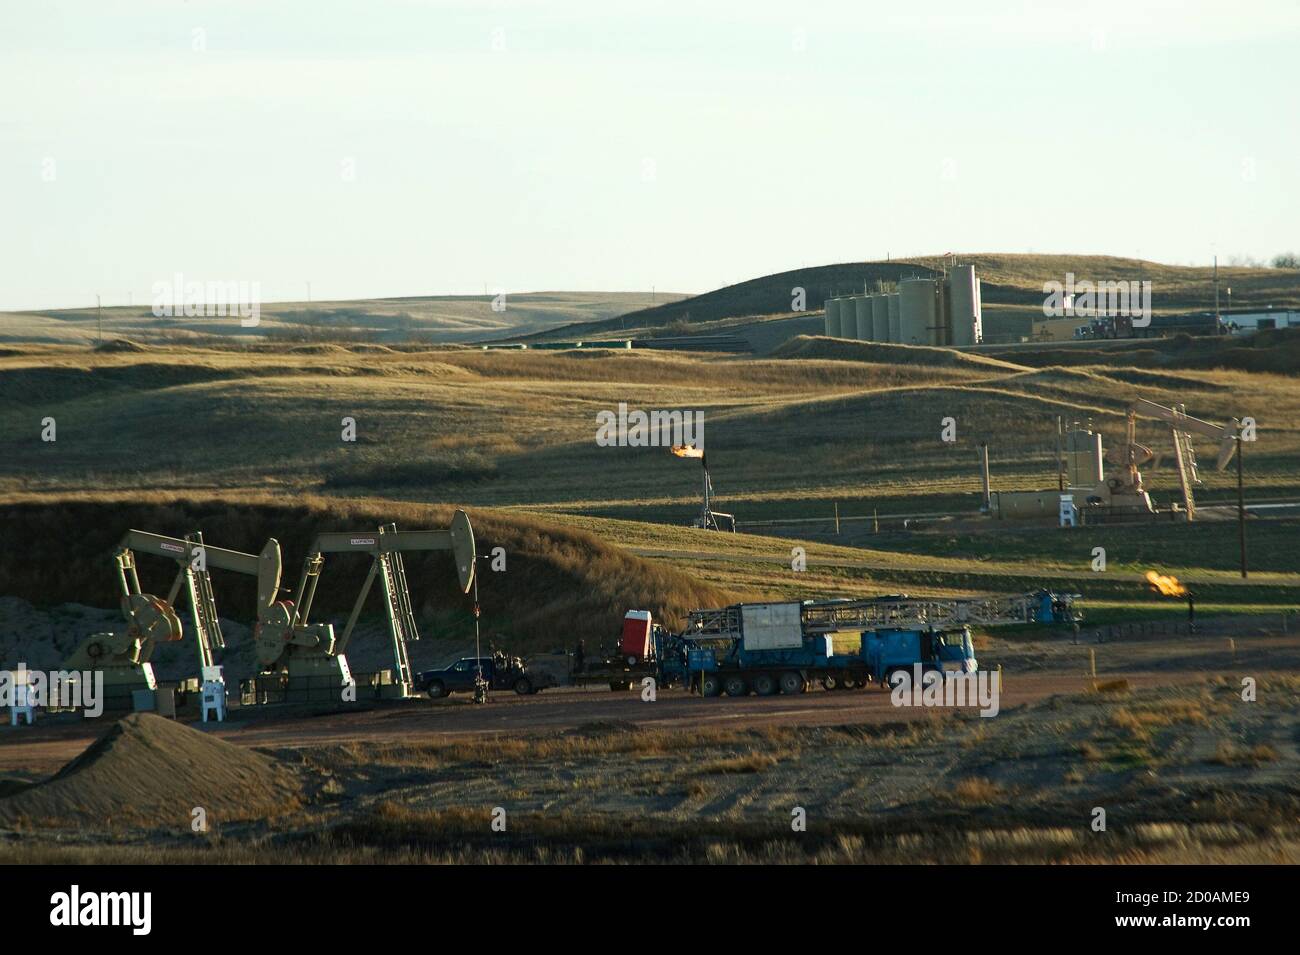 Multiple oil well sites are seen on the Fort Berthold Indian Reservation in North Dakota, in a November 1, 2014 file photo. The Fort Berthold Indian Reservation, home to the Mandan, Hidatsa, and Arikara Nation, produces nearly a third of North Dakota's oil. Officials on an American Indian reservation where roughly a third of North Dakota's oil is extracted tell Reuters they may walk away from a tax-sharing agreement with the state government, a step that could wreak havoc on the energy industry by creating dueling levy rates. If no agreement can be reached, EOG Resources Inc, Marathon Oil Co a Stock Photo